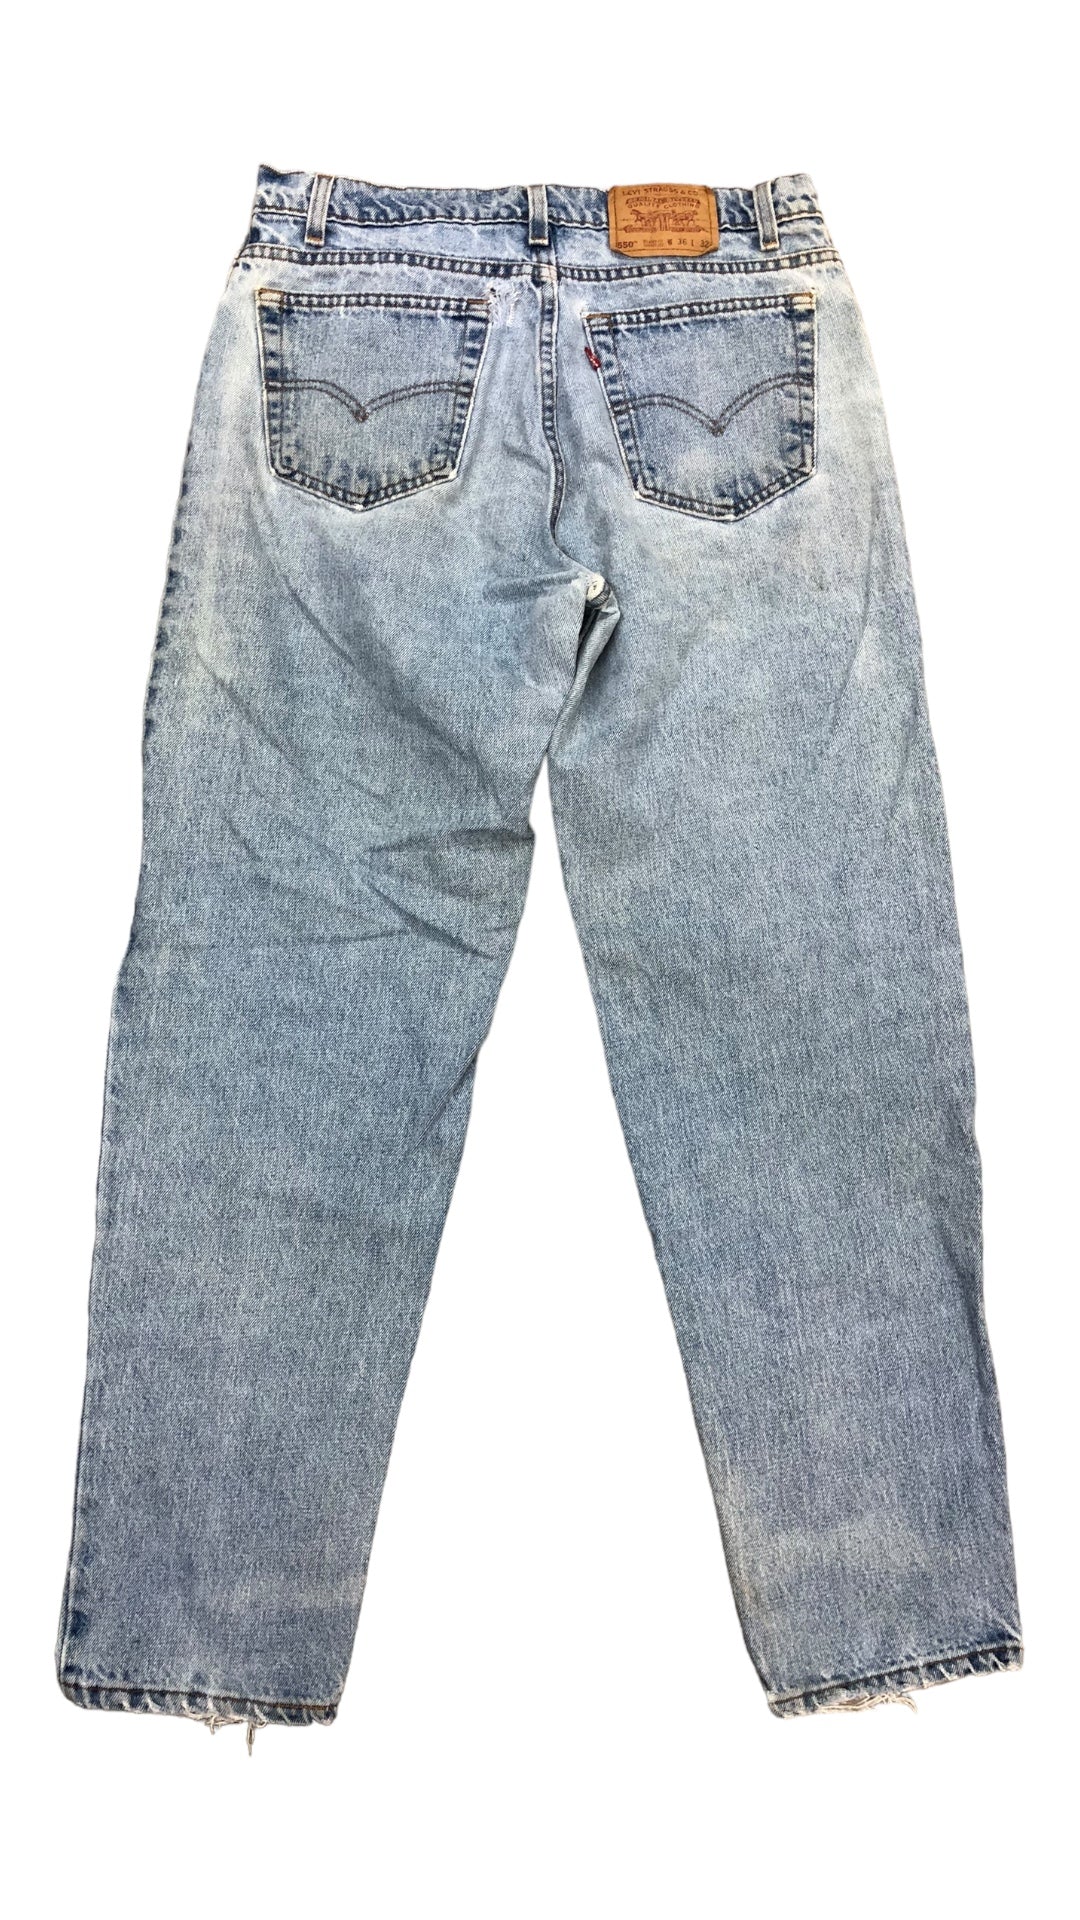 VTG Levi's 550 Relaxed Fit Tapered Leg Jeans Sz 34x31